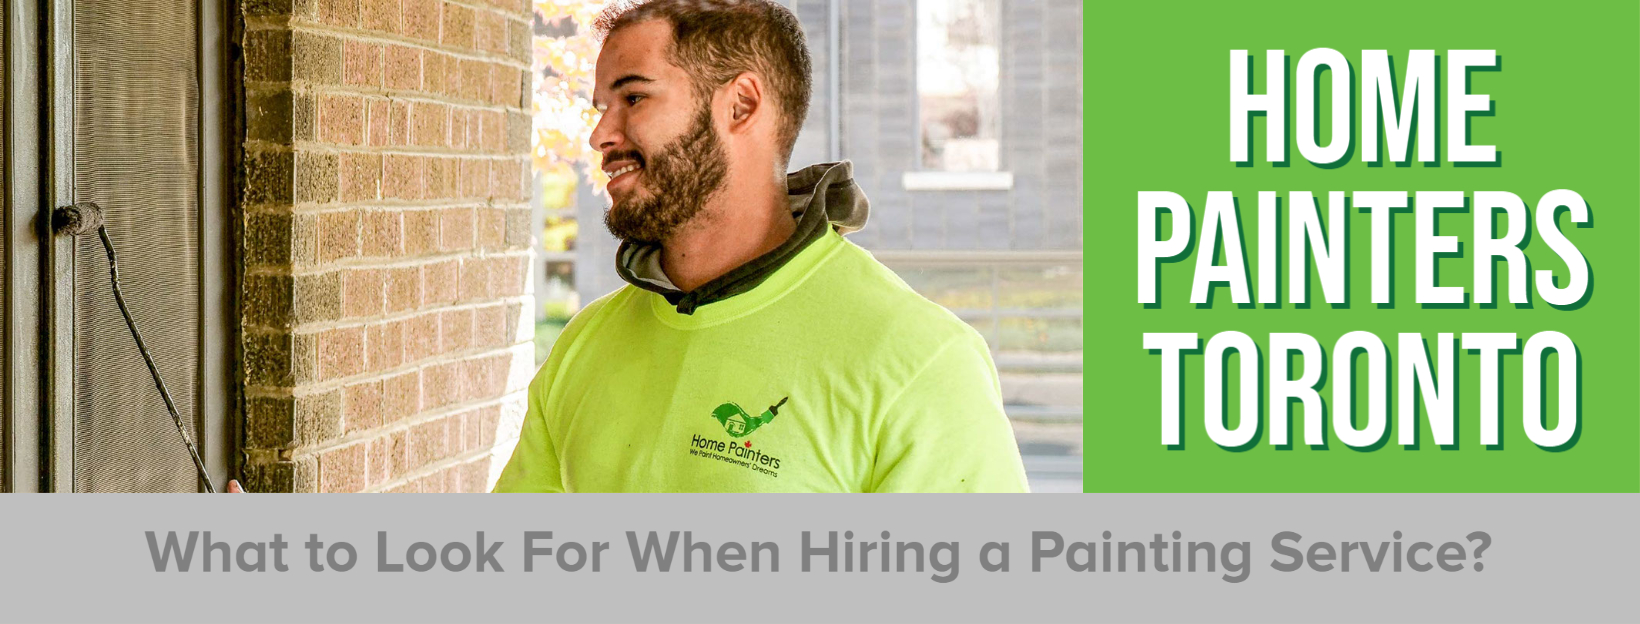 What to Look For When Hiring a Painting Service